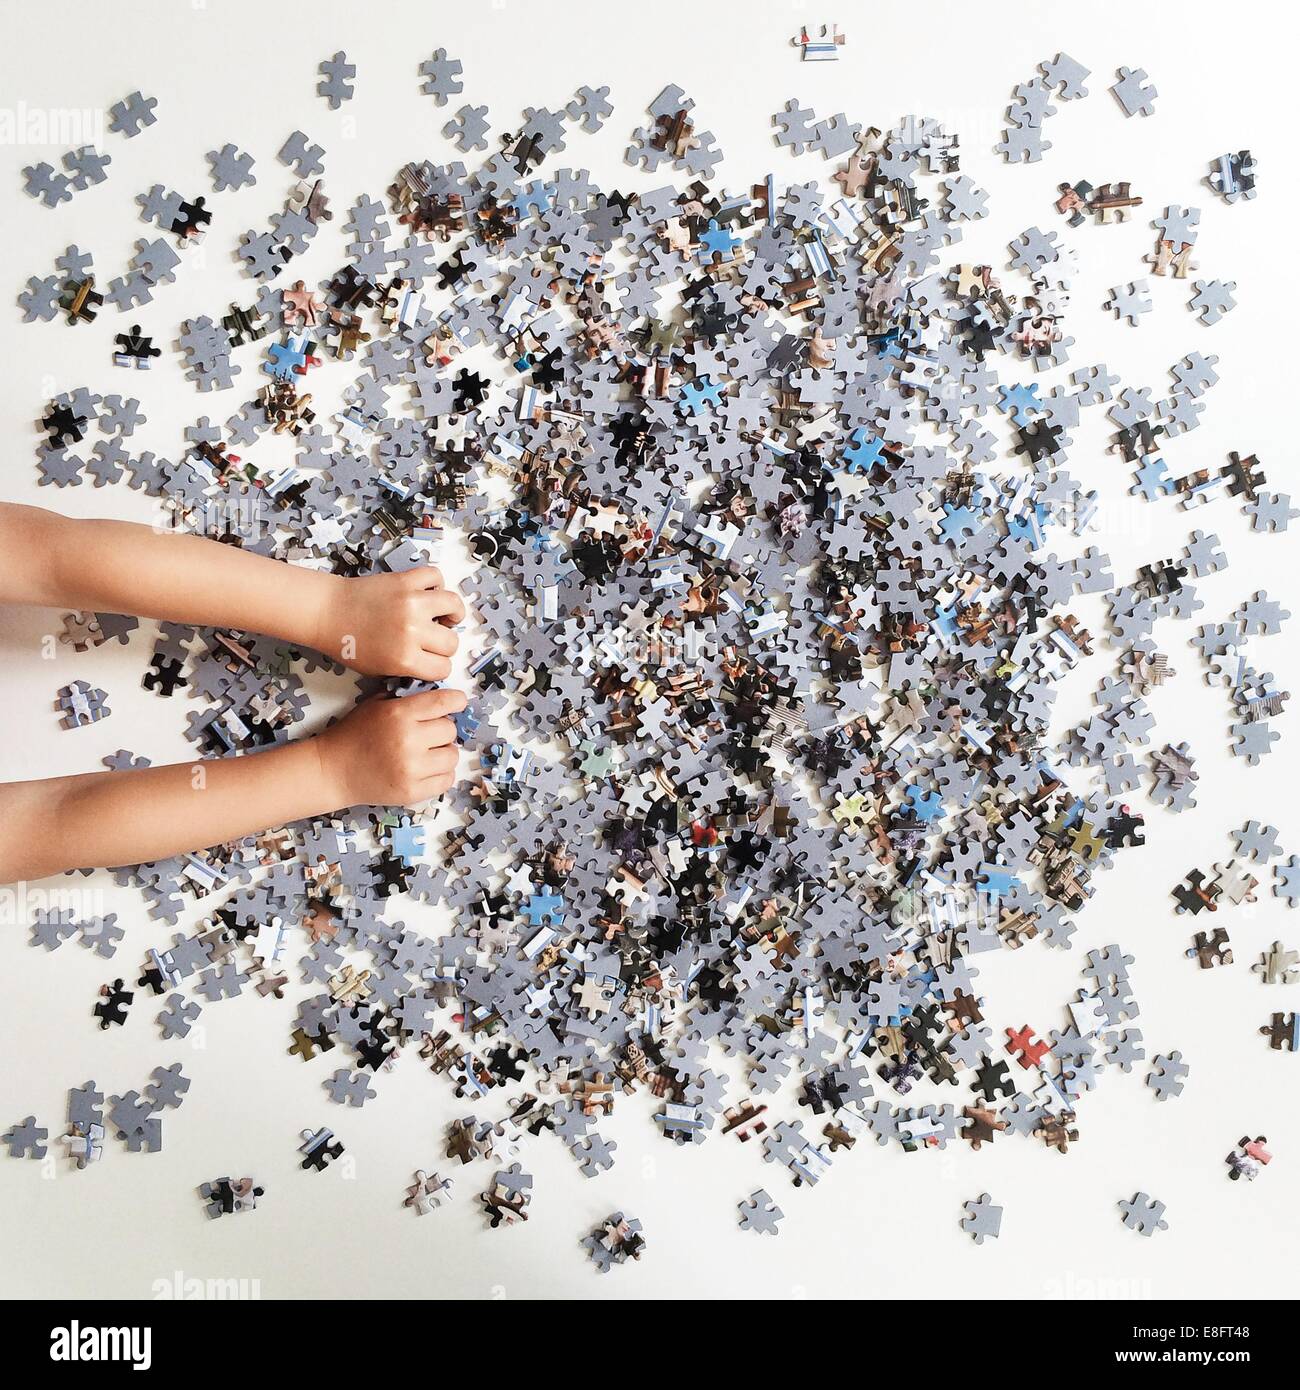 Human hands playing with jigsaw puzzle pieces Stock Photo